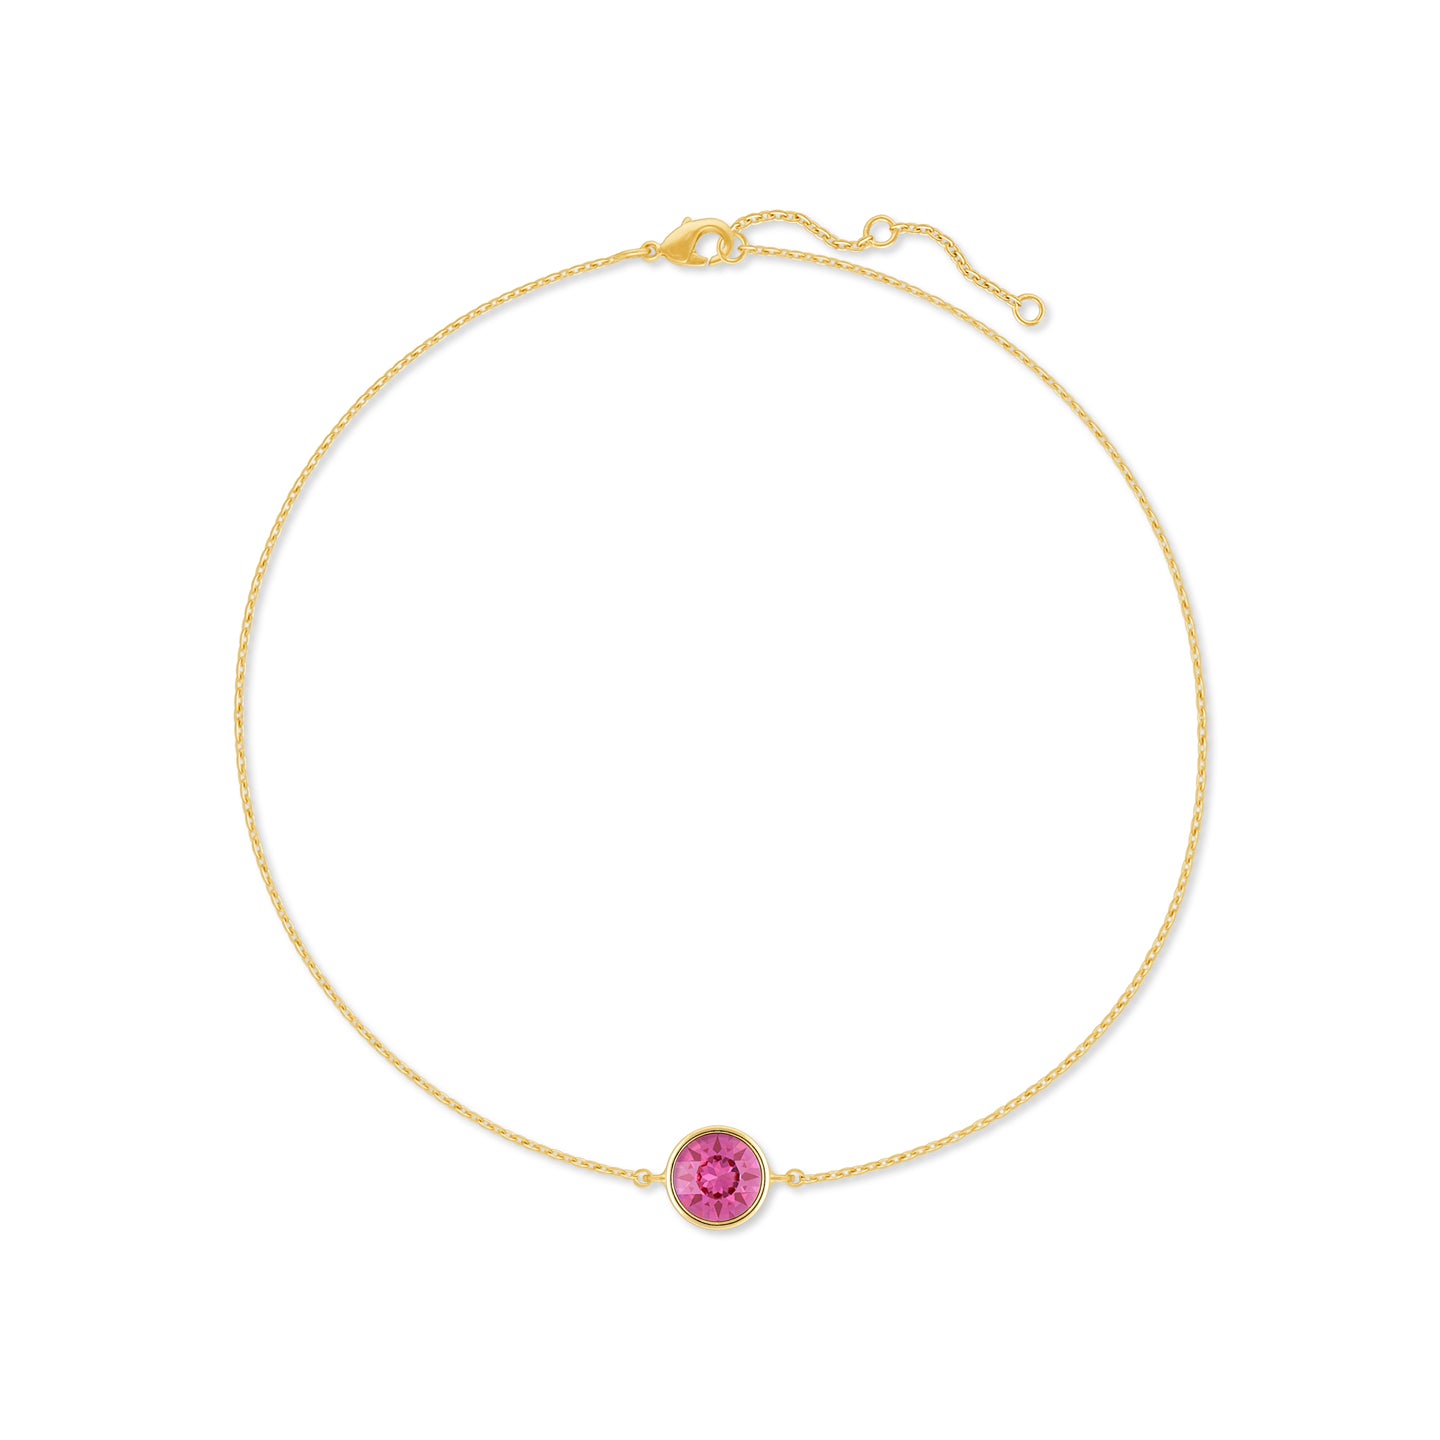 Harley Chain Bracelet with Pink Rose Round Crystals from Swarovski Gold Plated - Ed Heart